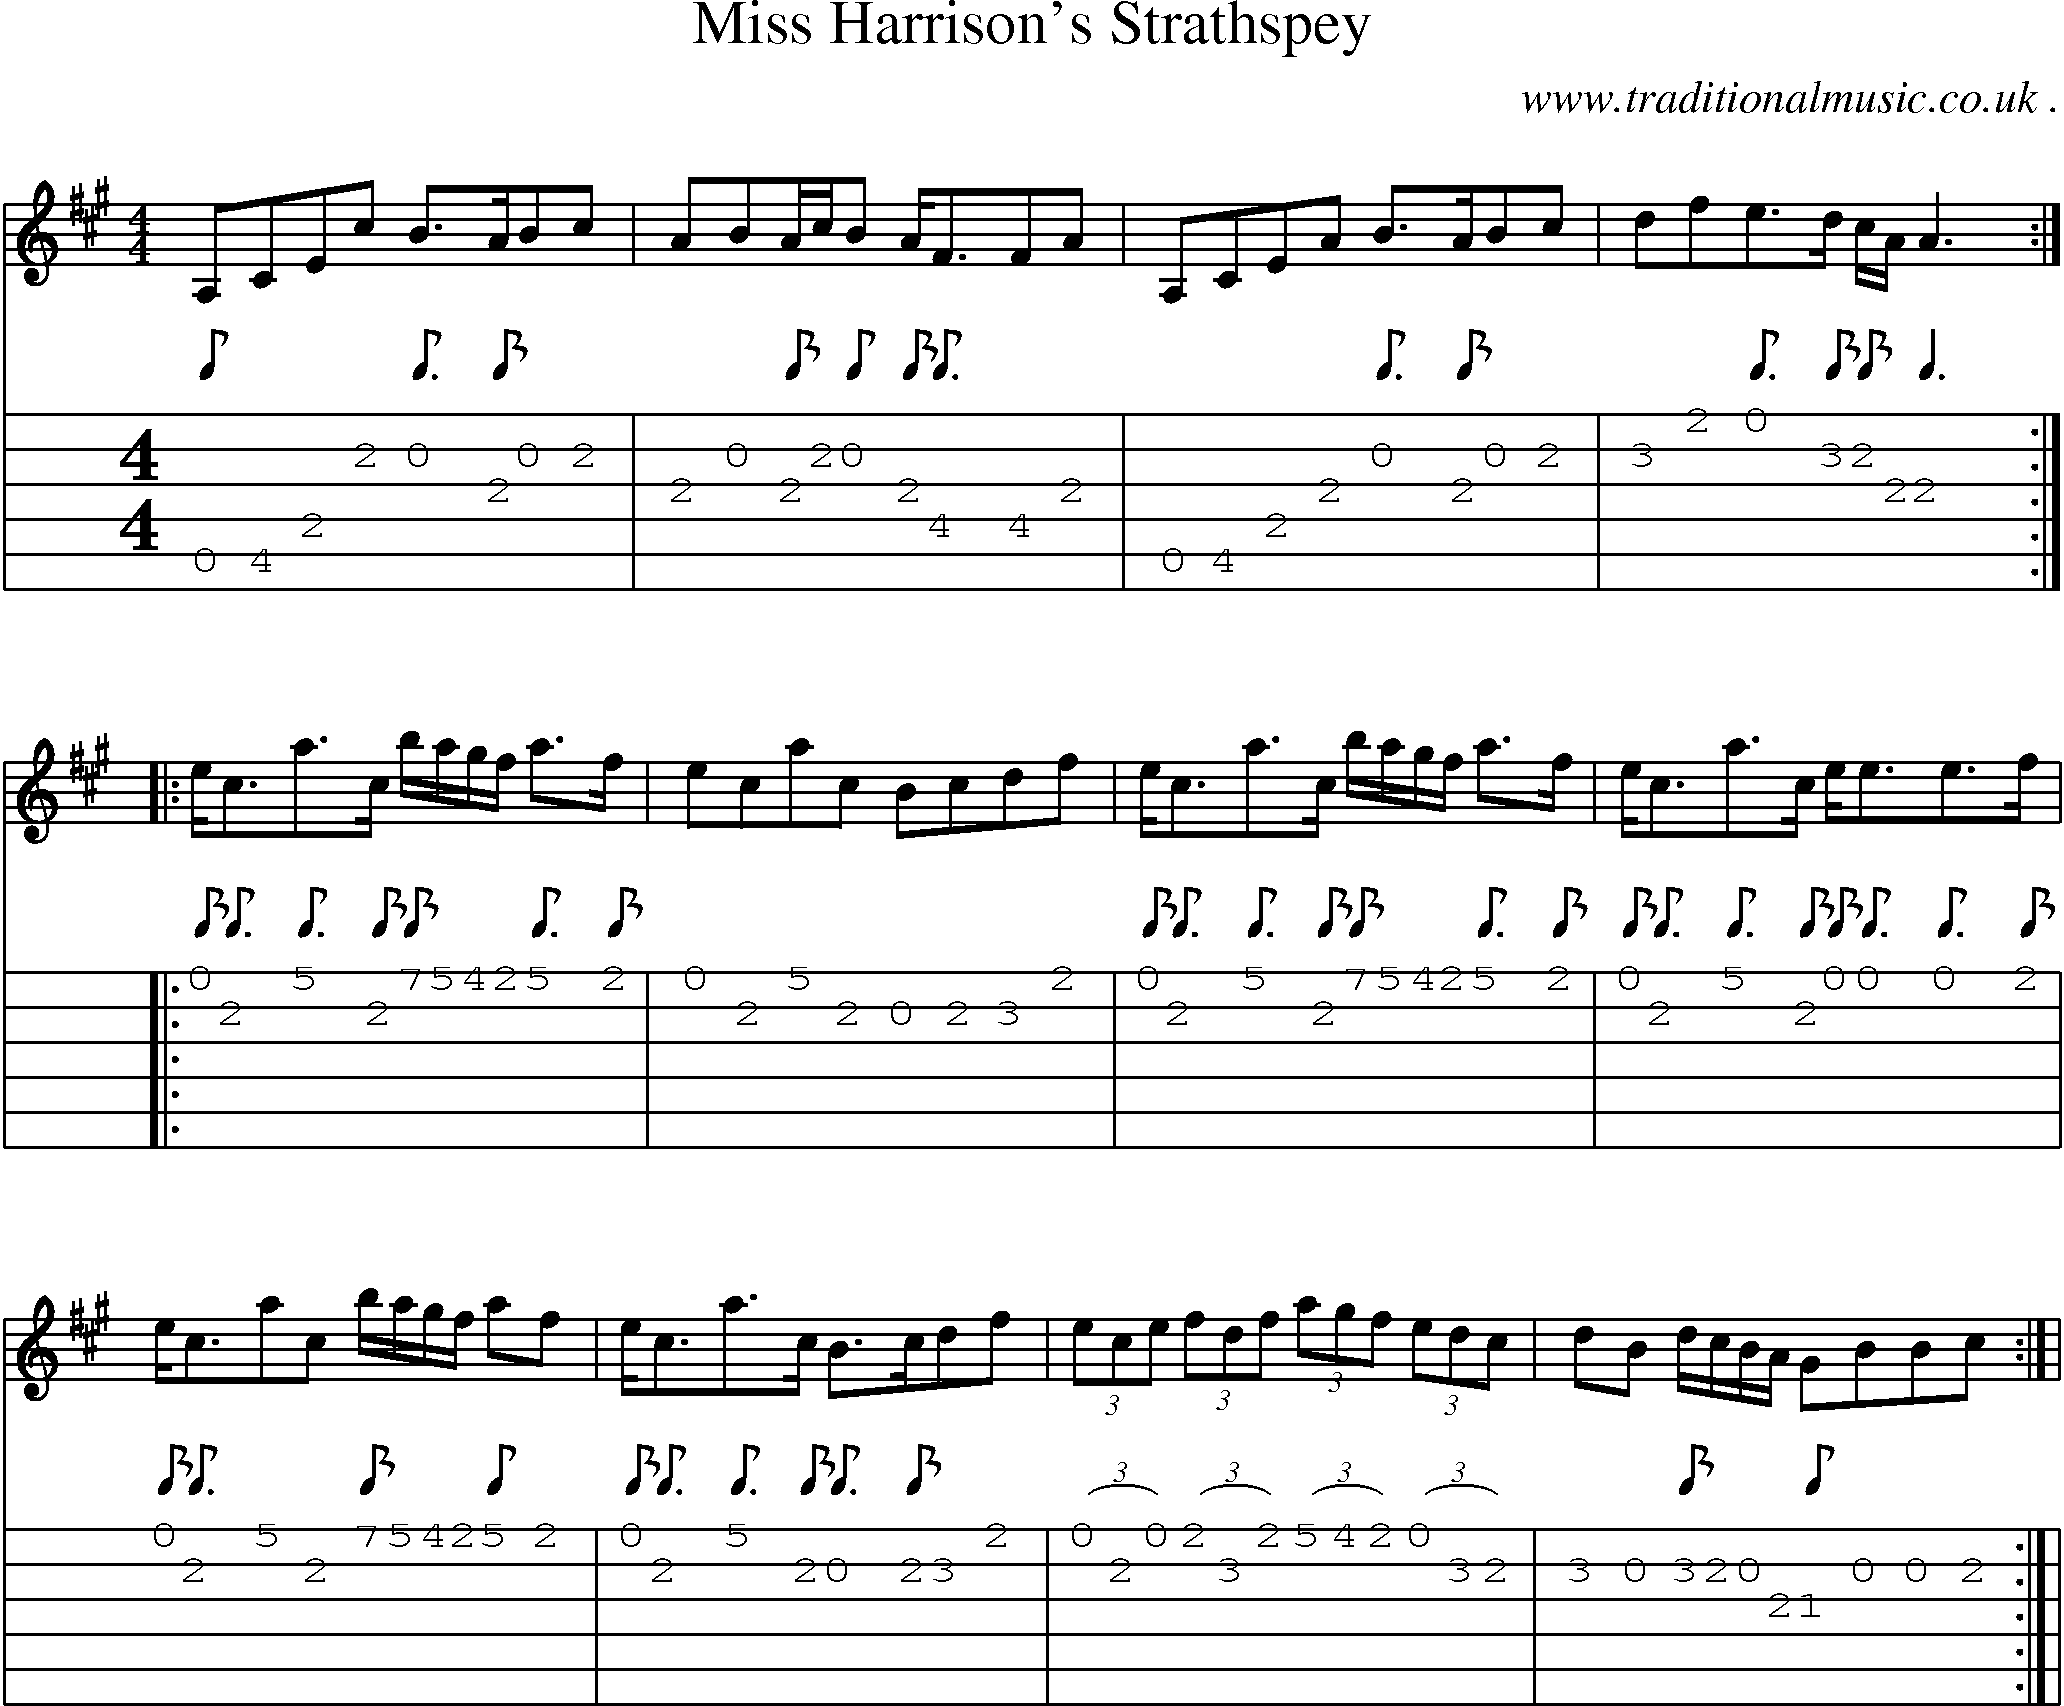 Sheet-Music and Guitar Tabs for Miss Harrisons Strathspey